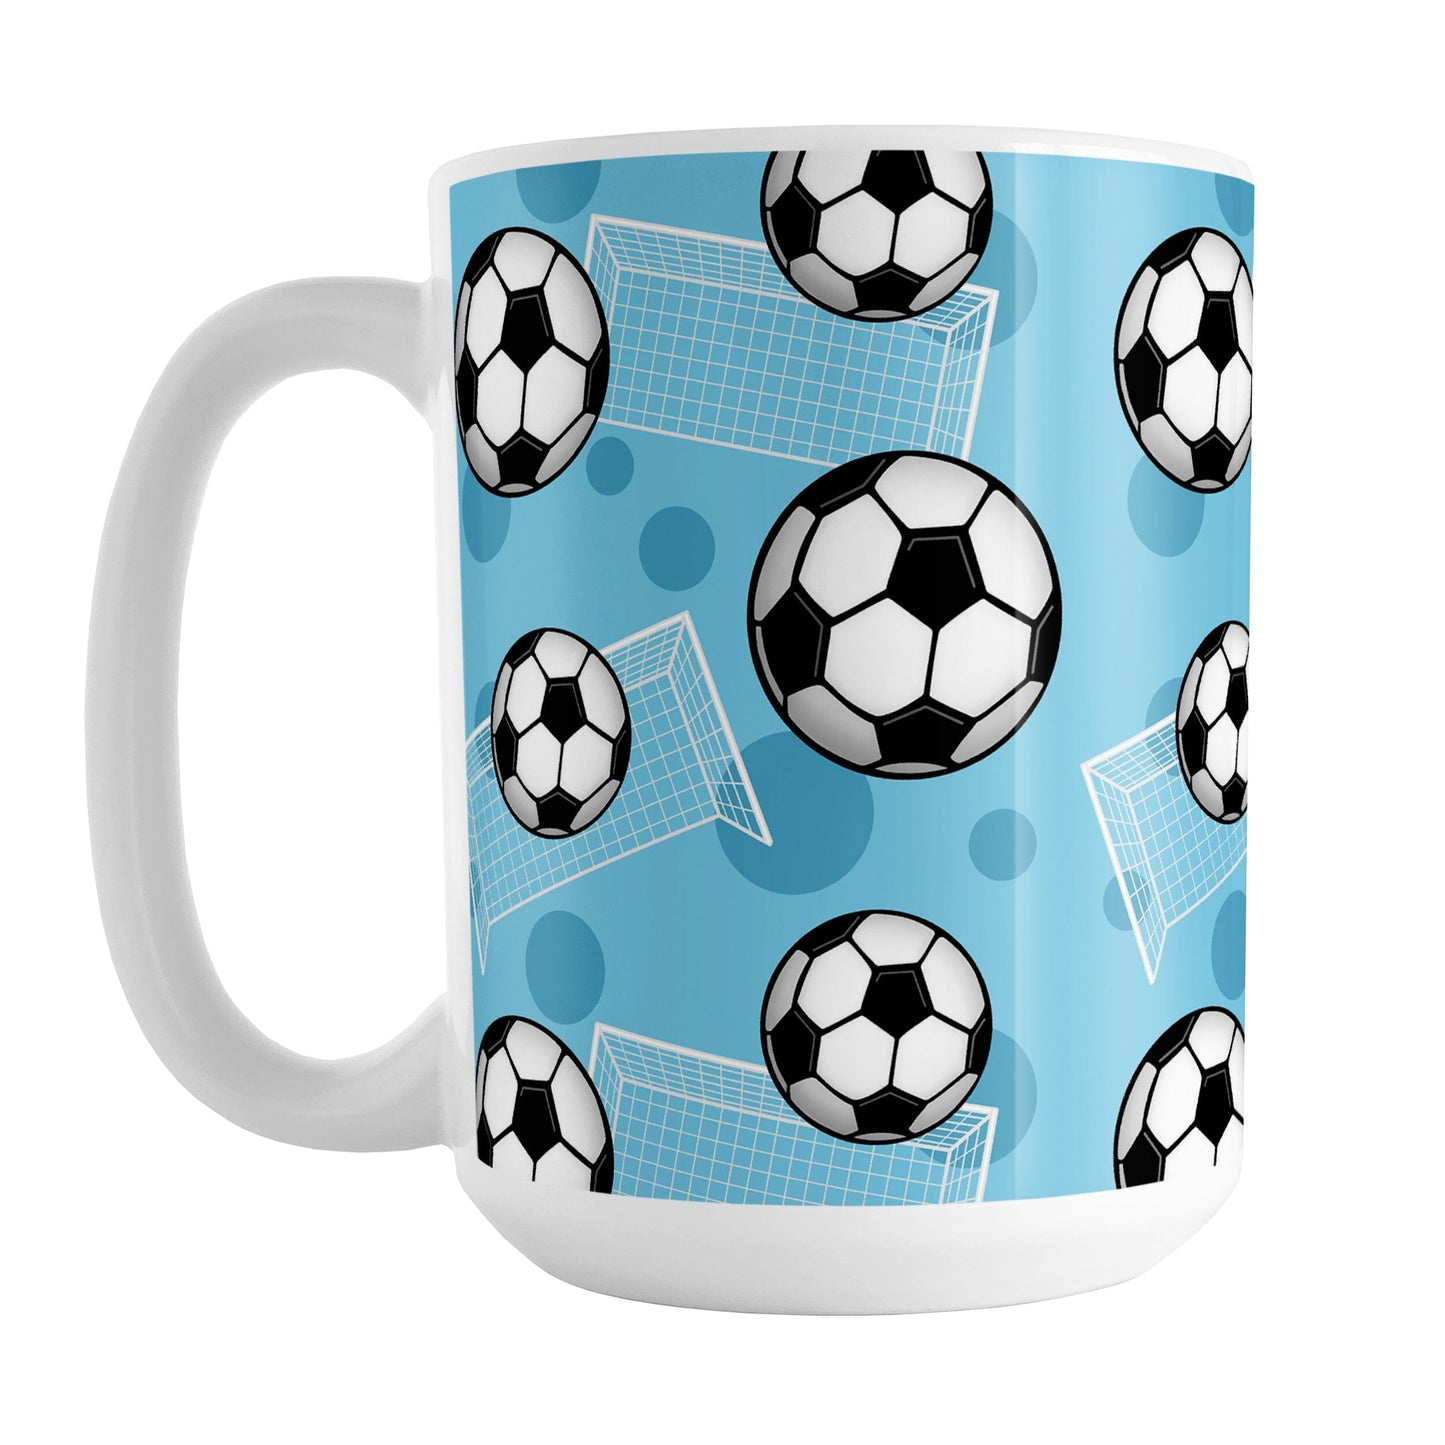 Soccer Ball and Goal Pattern Blue Mug (15oz) at Amy's Coffee Mugs. A ceramic coffee mug designed with a pattern of soccer balls and soccer goals over a blue background color with blue circles. 